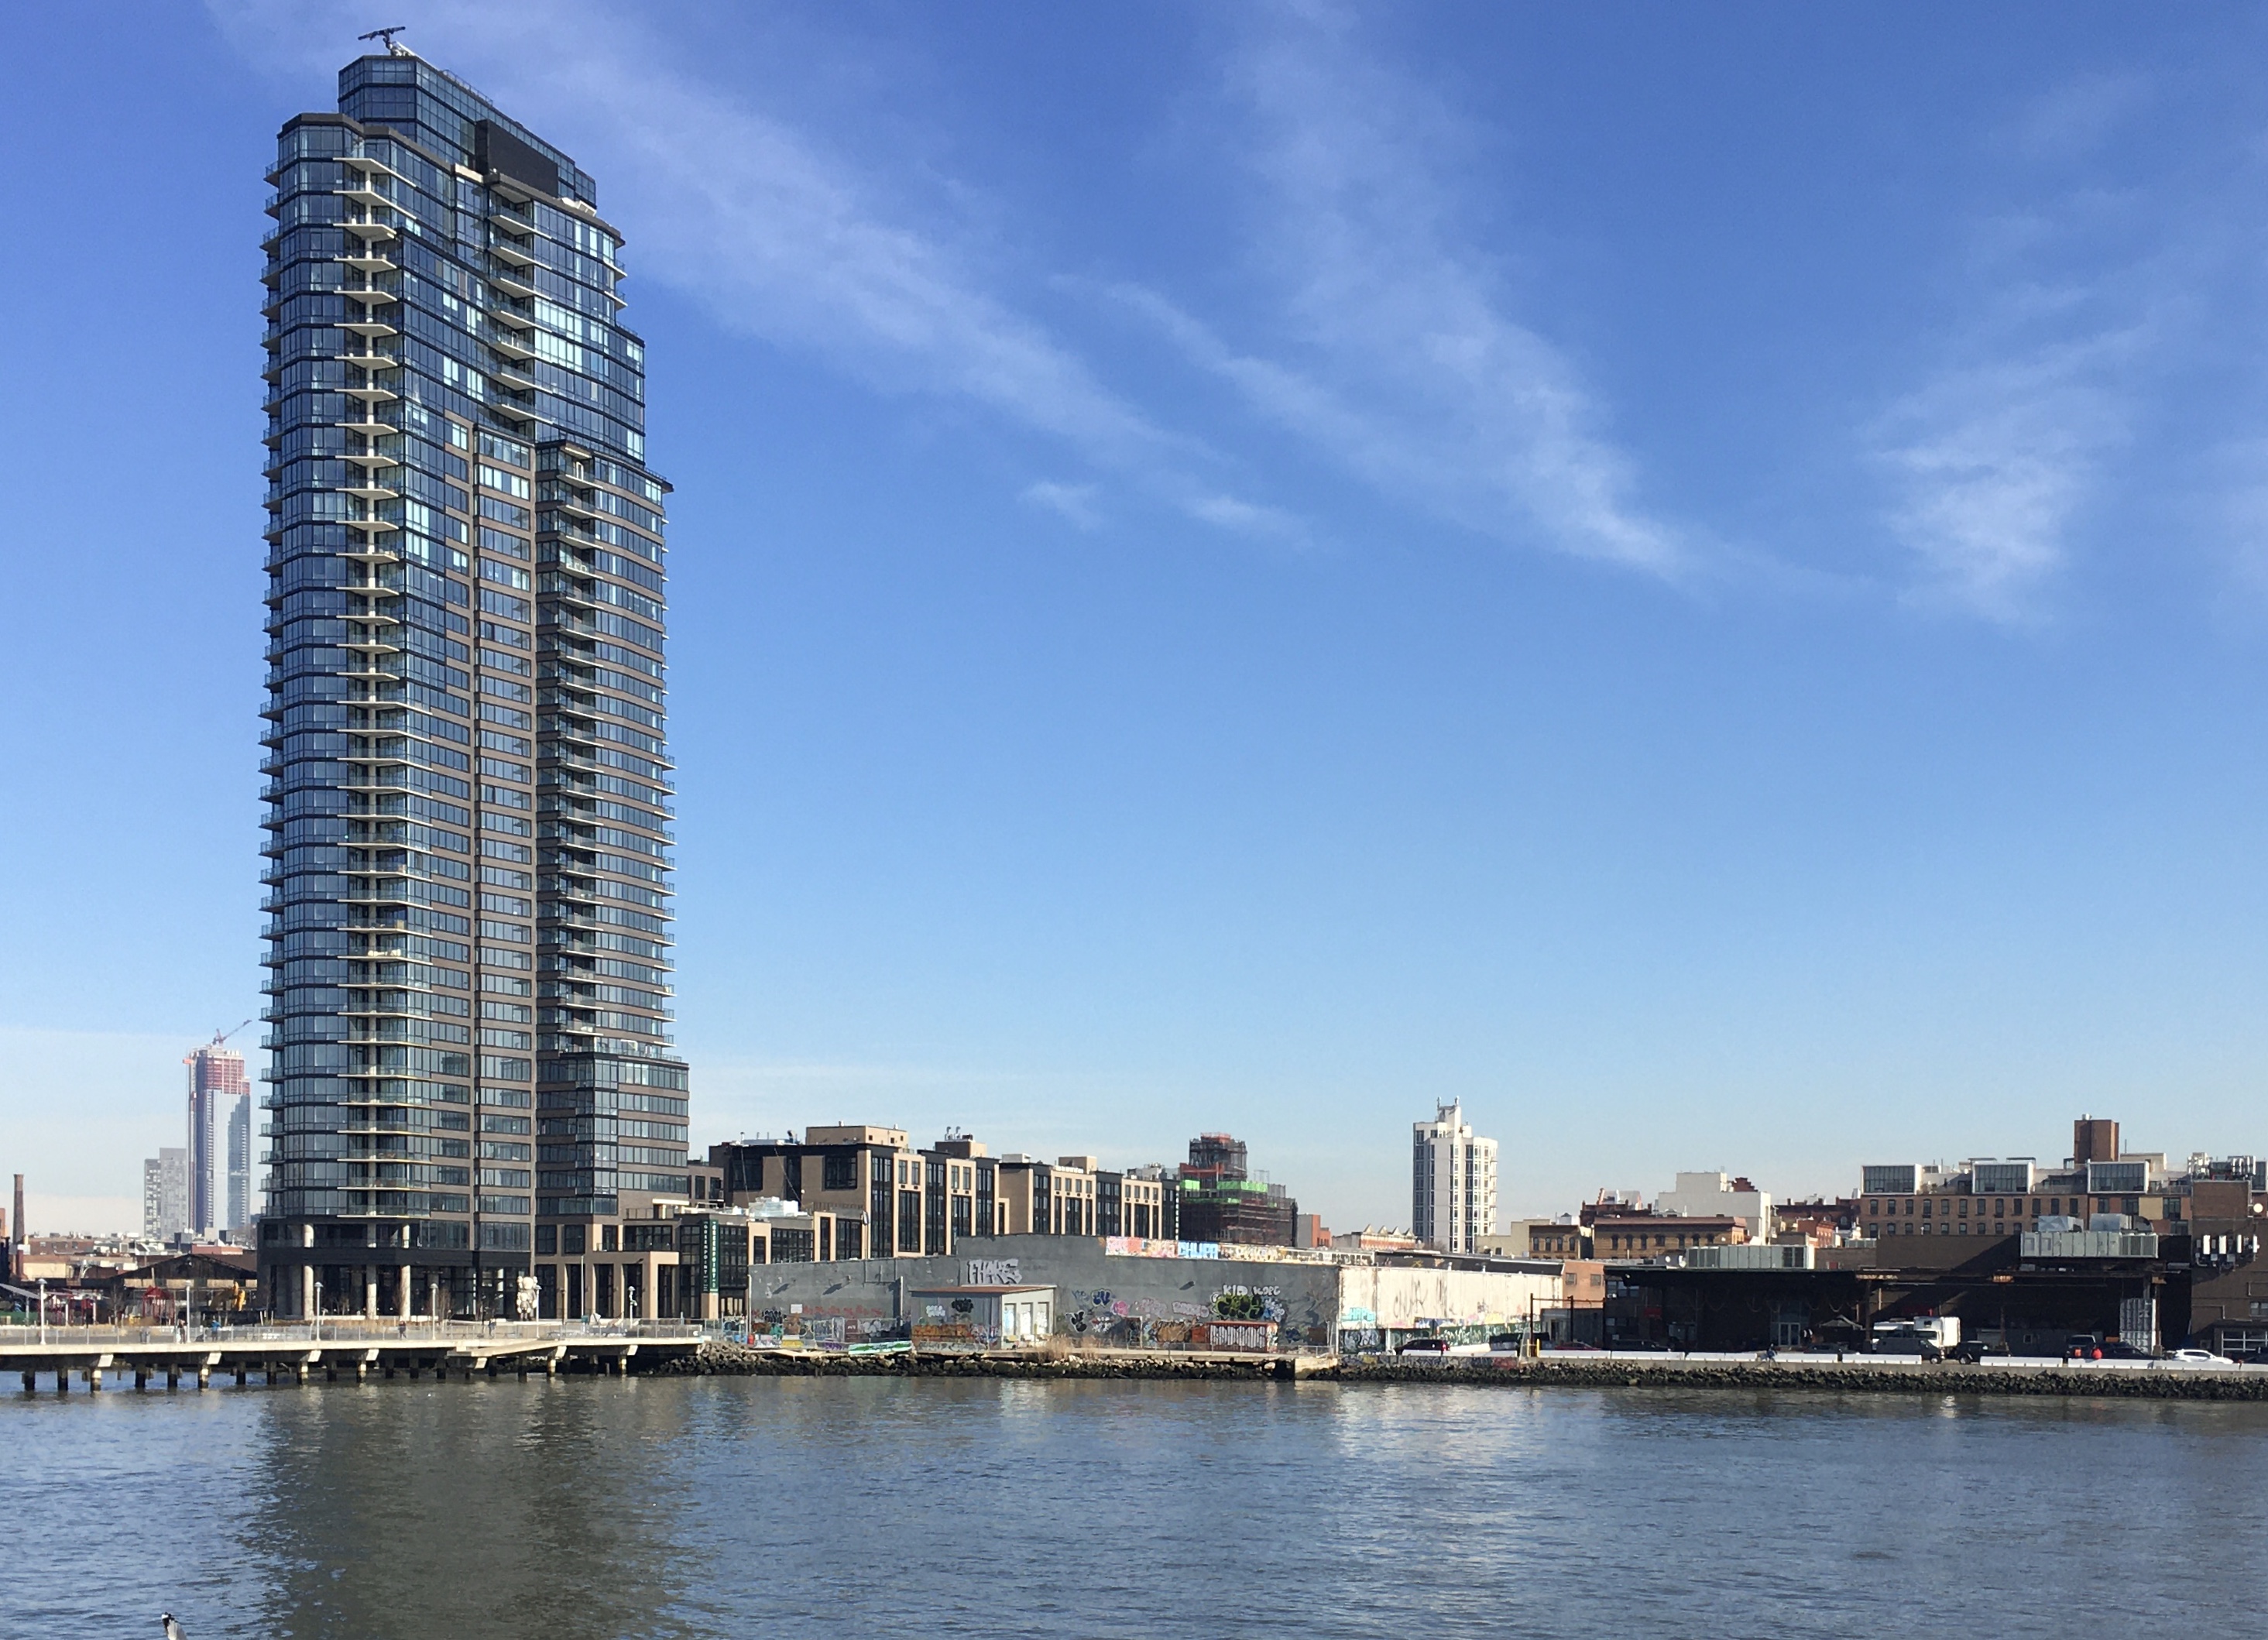 The NYC Ferry has a dock outside The Greenpoint, a new residential tower. Photo: Lore Croghan/Brooklyn Eagle